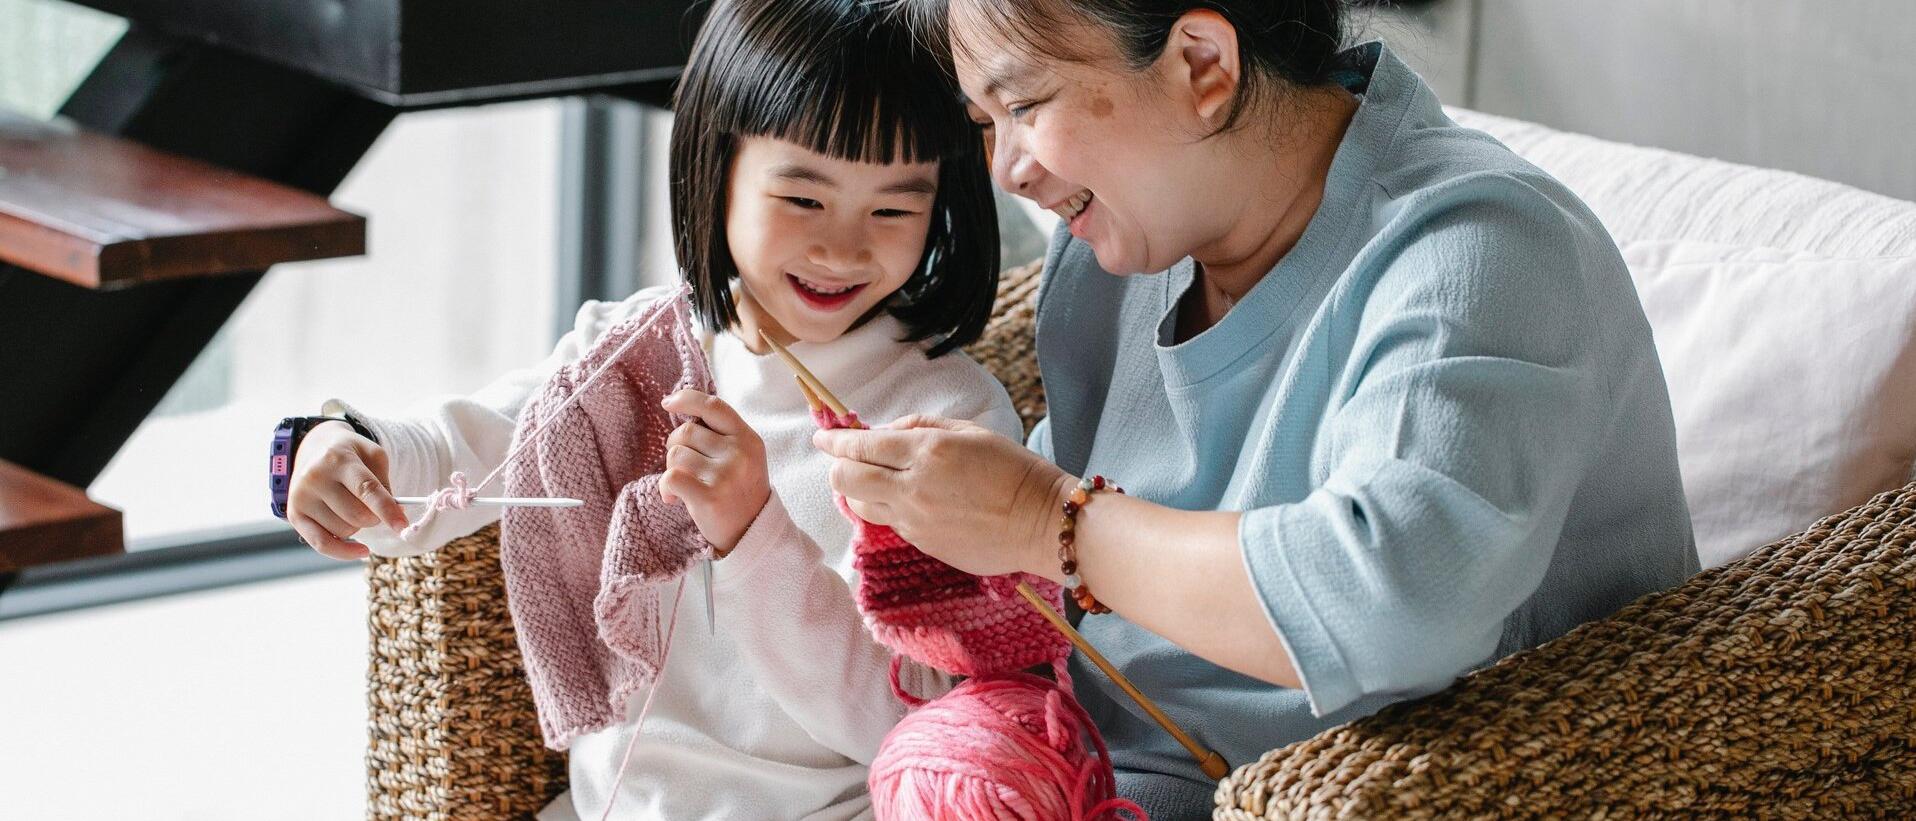 A older women smiling with a smaller child seated on her lap in a chair, she teaches the child how to knit with pink yarn